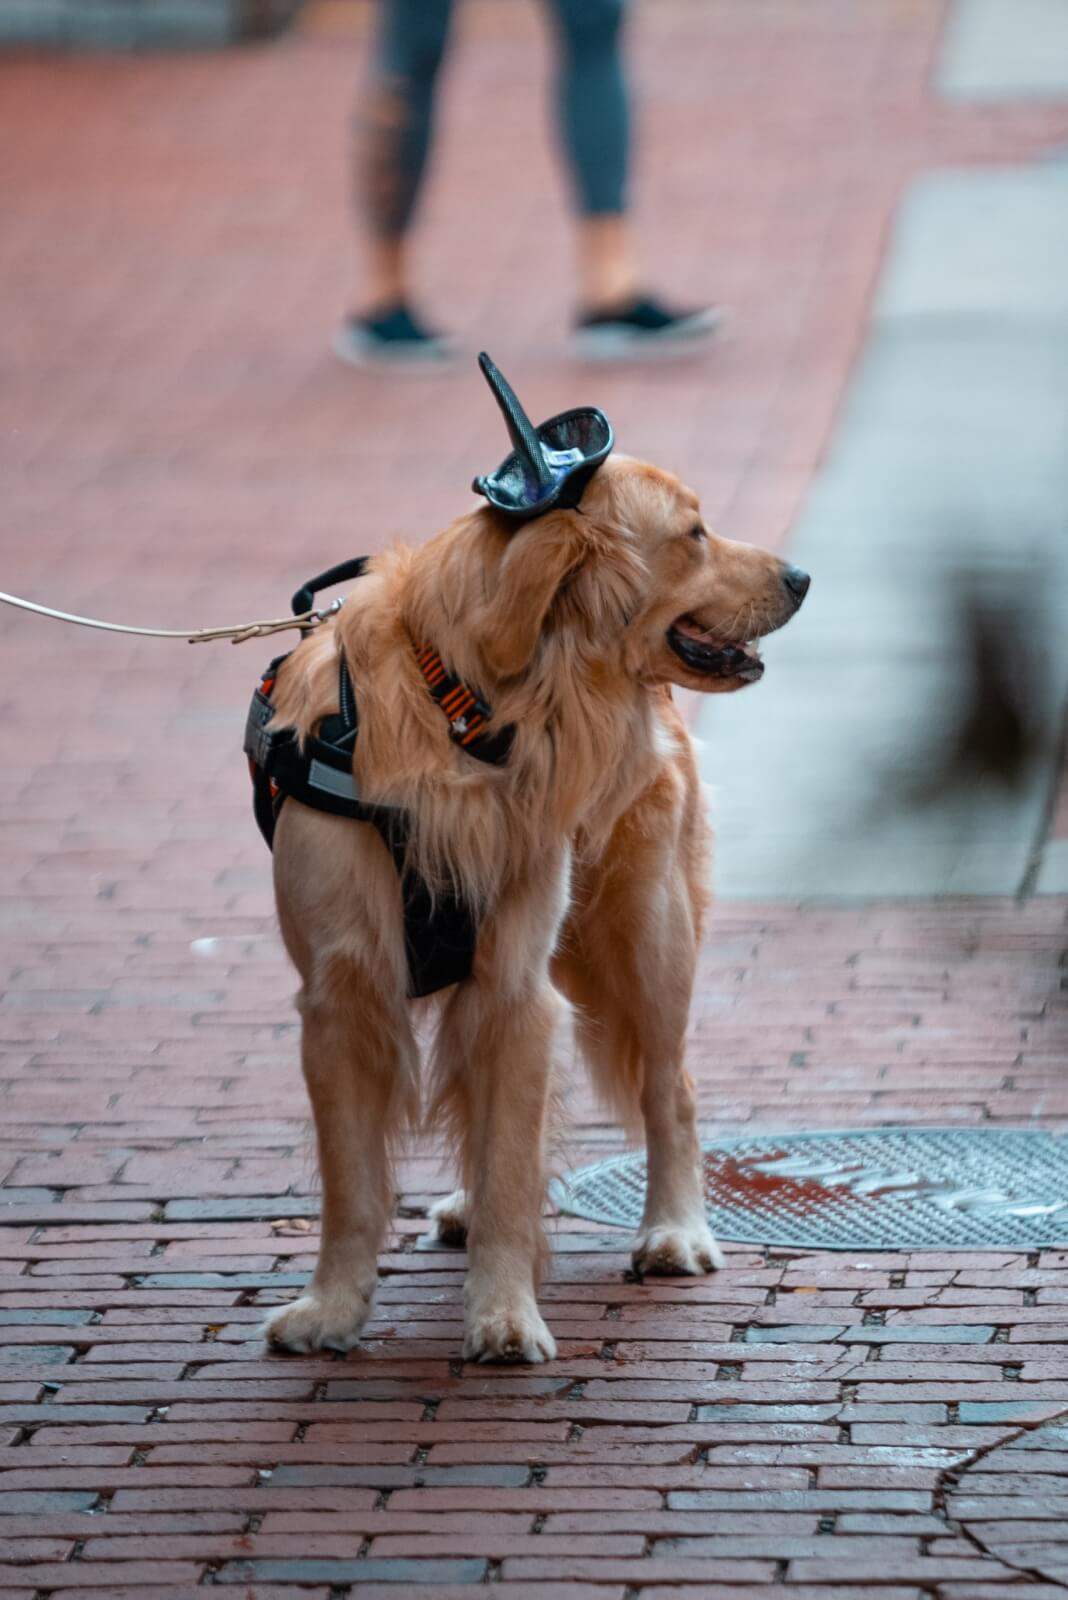 dog dressed up as a witch in salem massachusetts in Octoberf